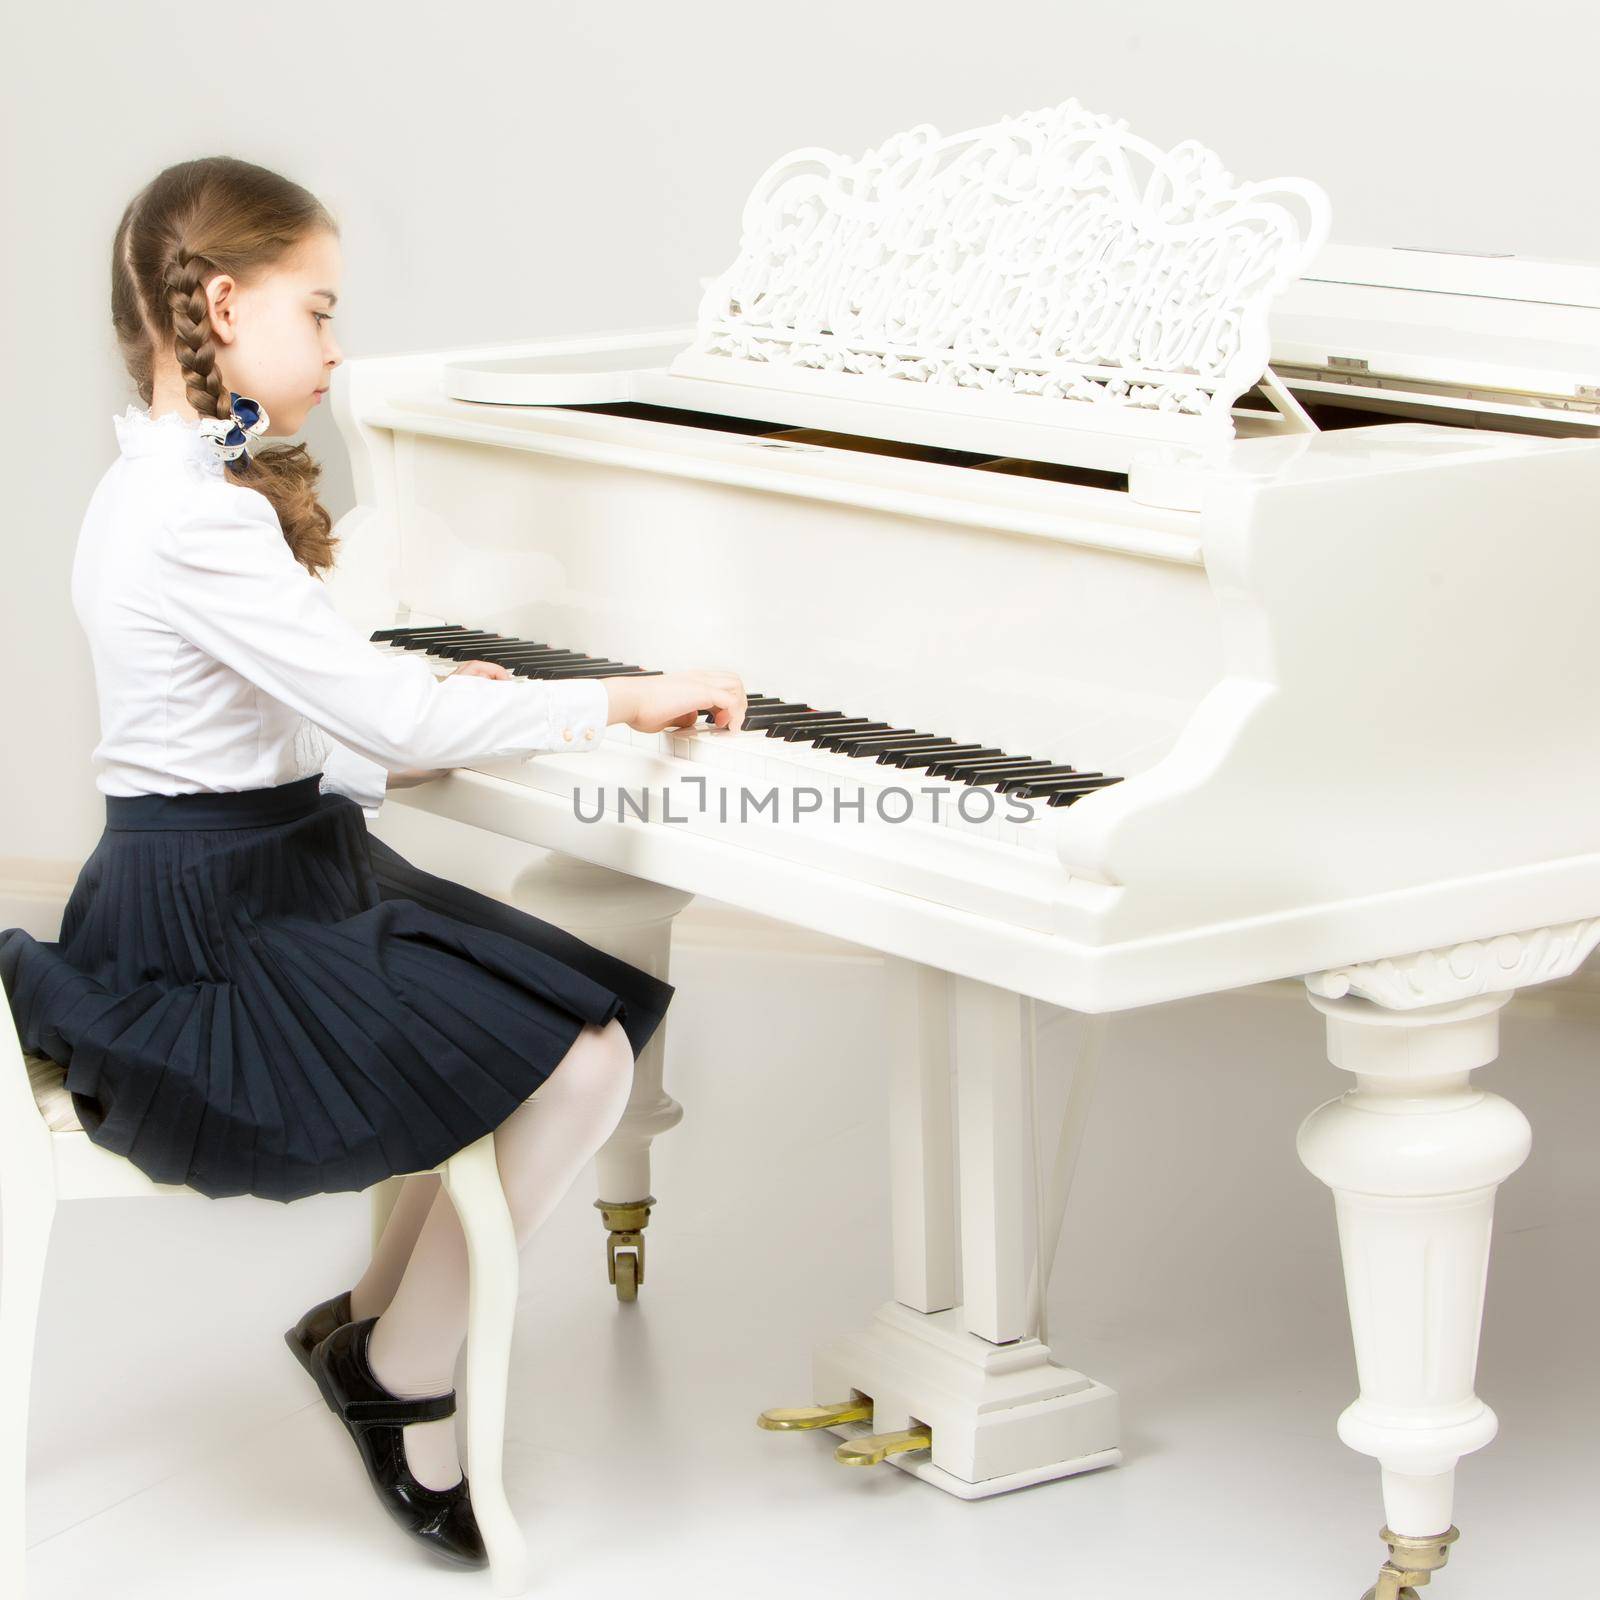 Charming little blonde with long wattled hair in plaits, playing on a white grand piano. In musical school.